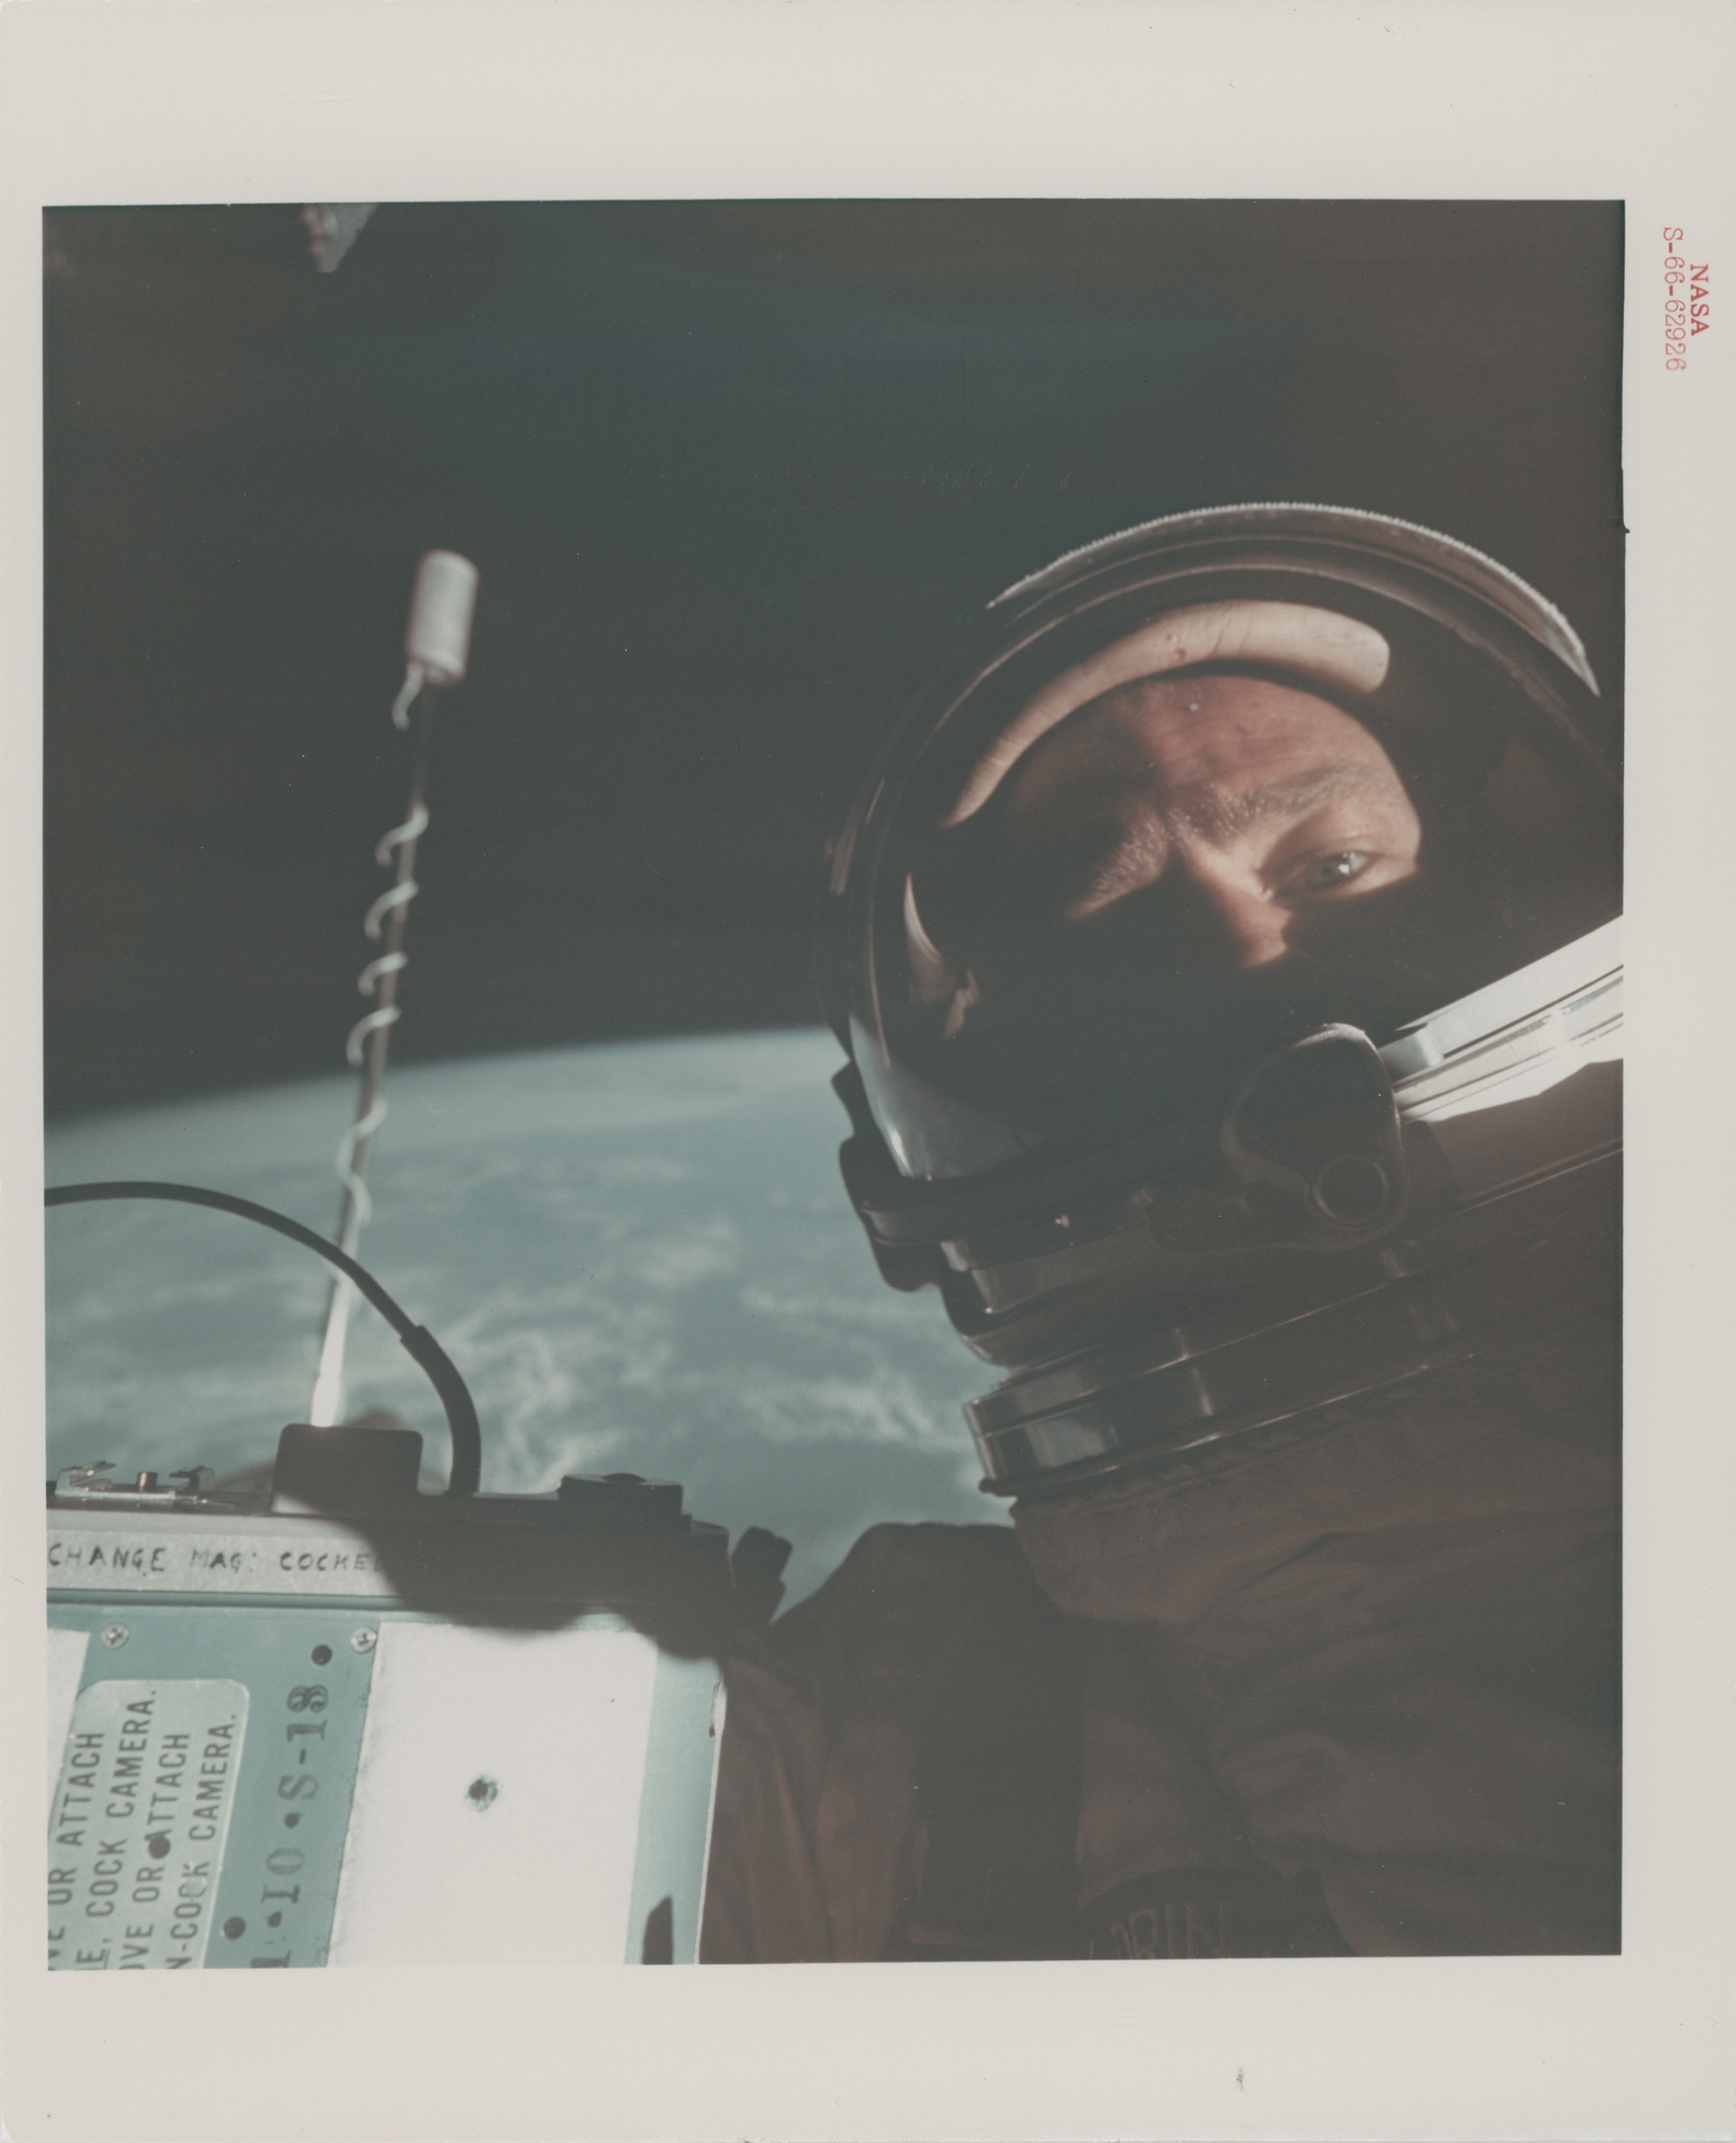 The first selfie in outer space, 11 - 15 November 1966, vintage chromogenic print on fiber-based paper, printed 1966, numbered 